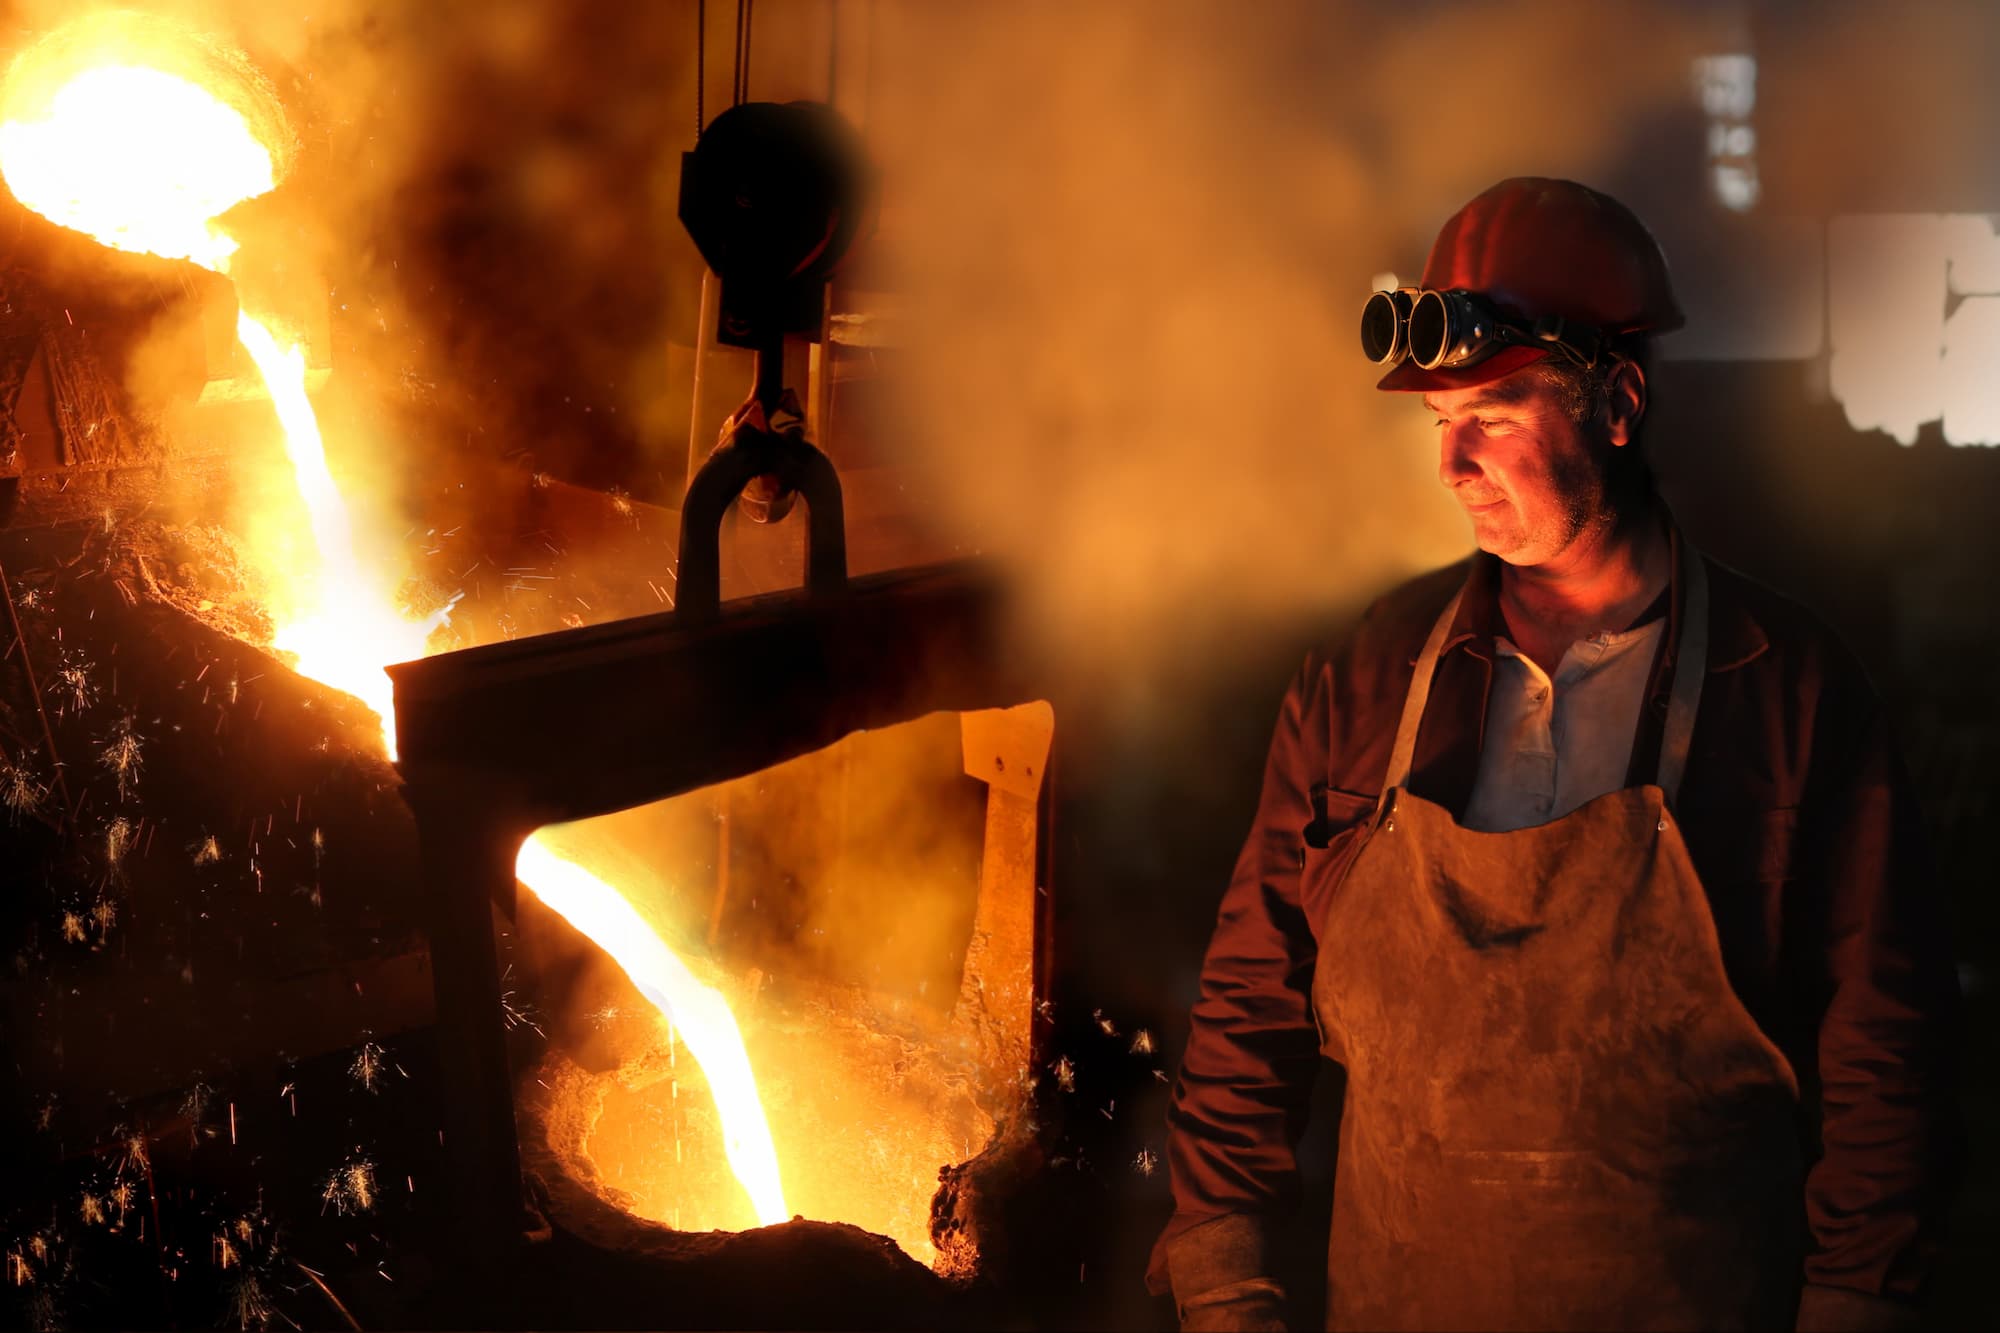 Production worker in a foundry with a melting iron works to alleviate metal warping.